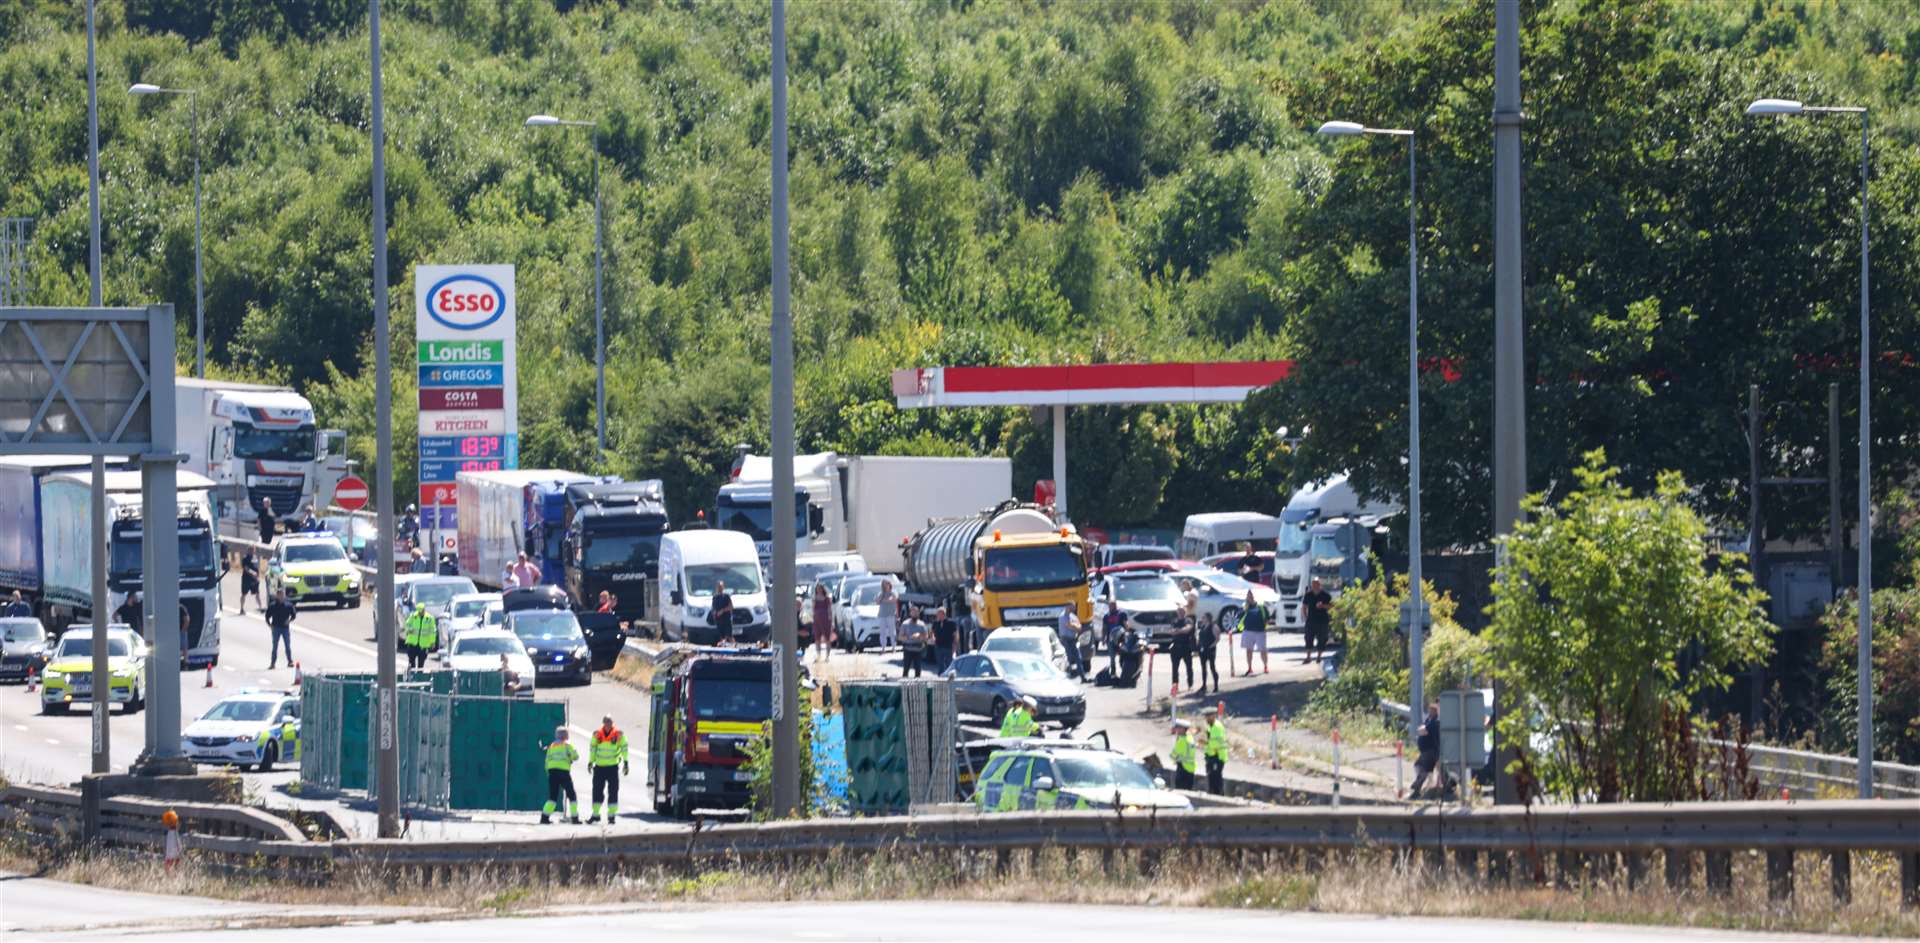 Emergency services at Cobham Services on the A2 after the serious crash. Images: UKNIP